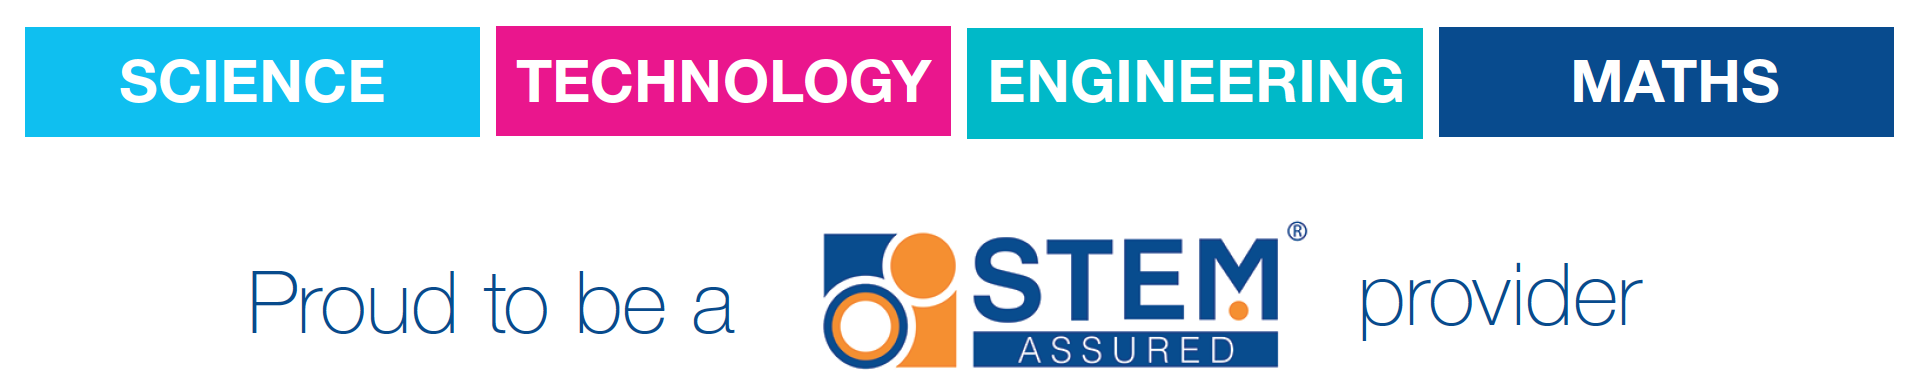 Proud to be a STEM provider